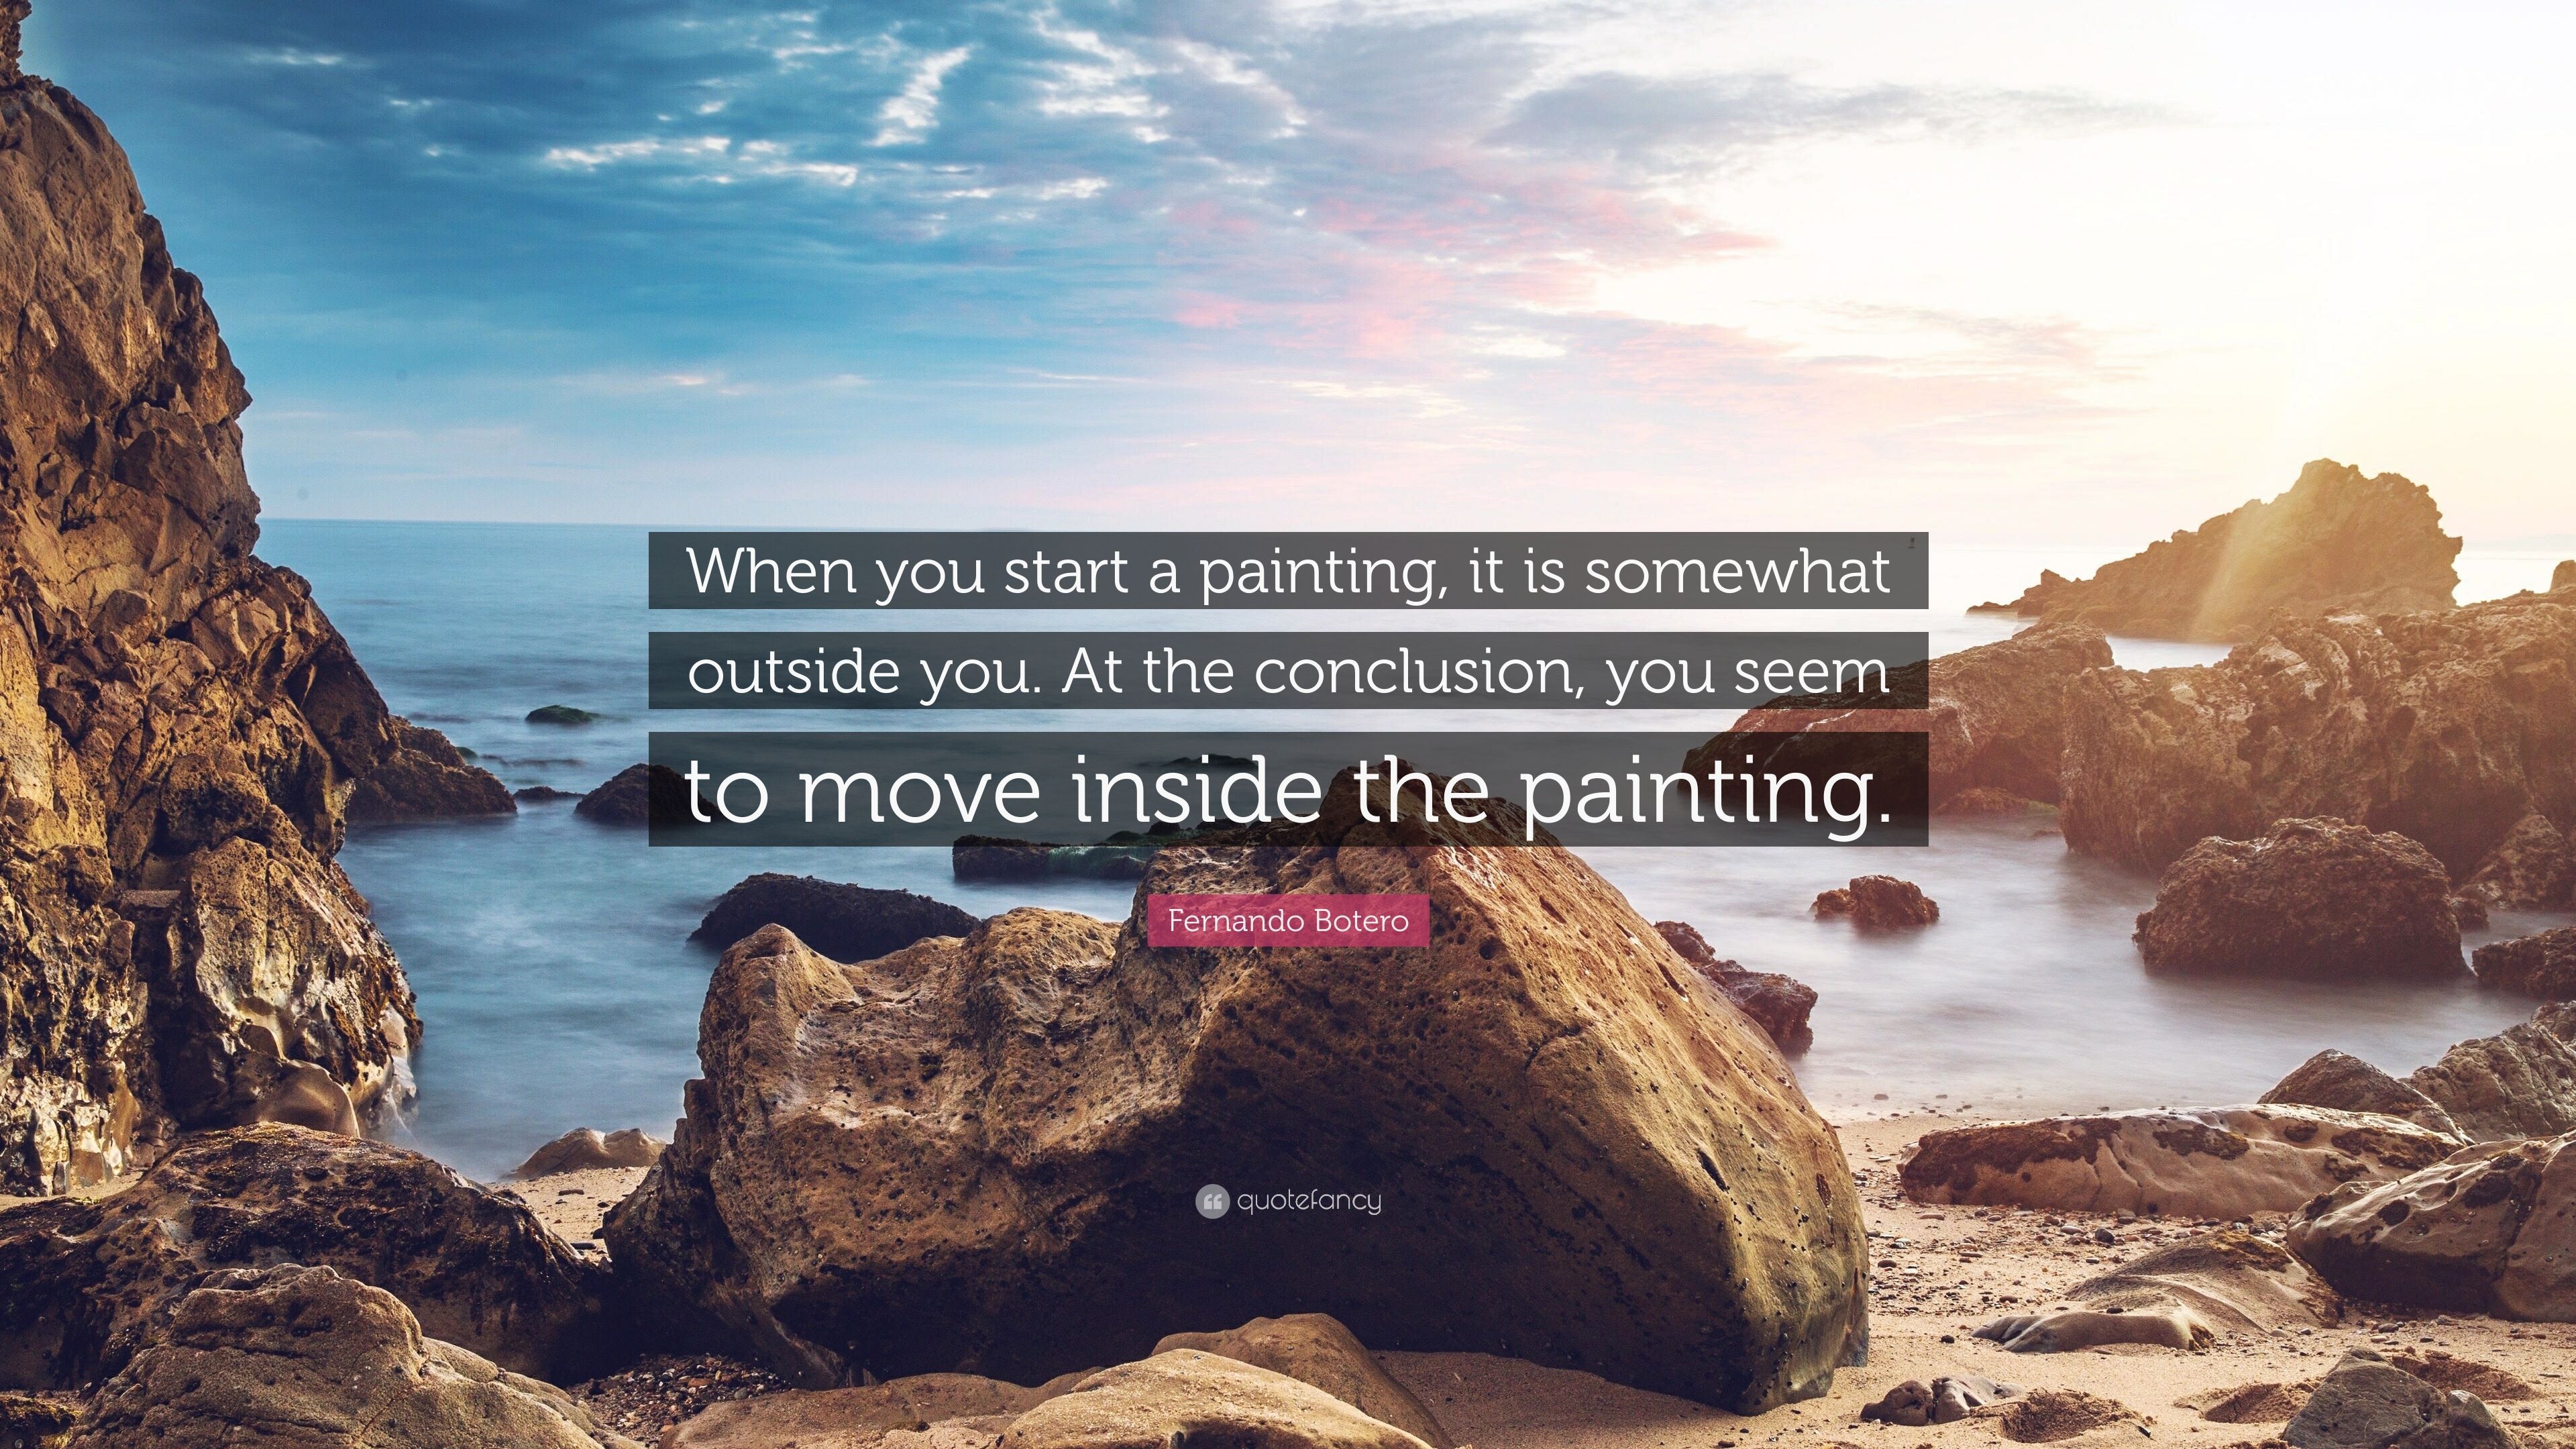 Fernando Botero Quote: “When you start a painting, it is somewhat